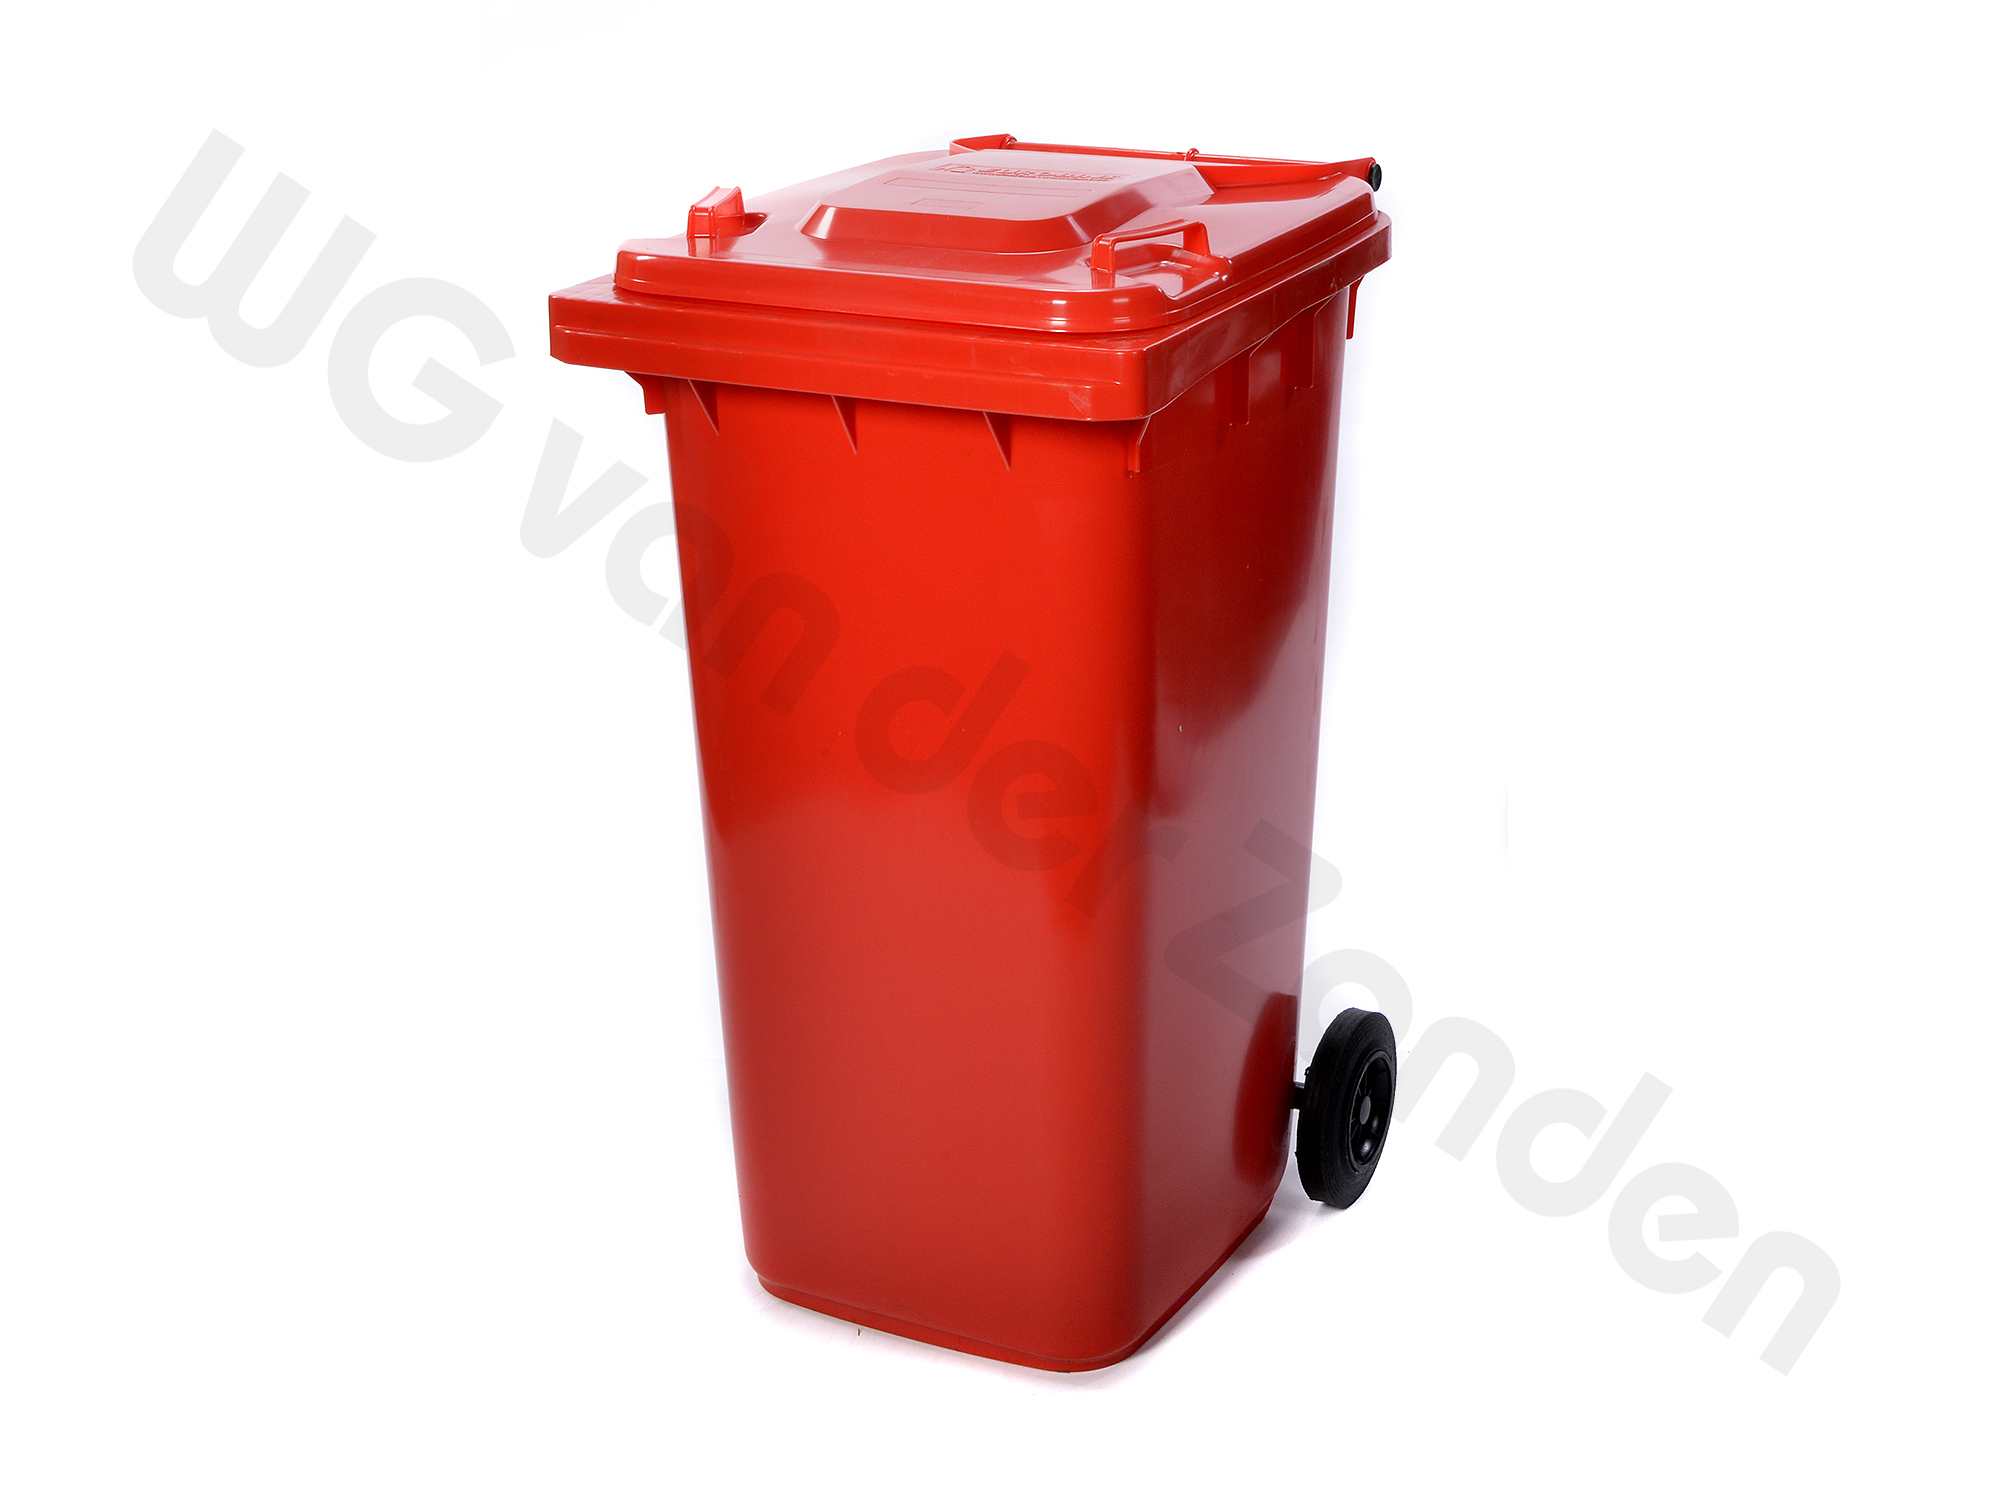 440341 GARBAGE CONTAINER 240 LTR PLASTIC TWO WHEELED RED